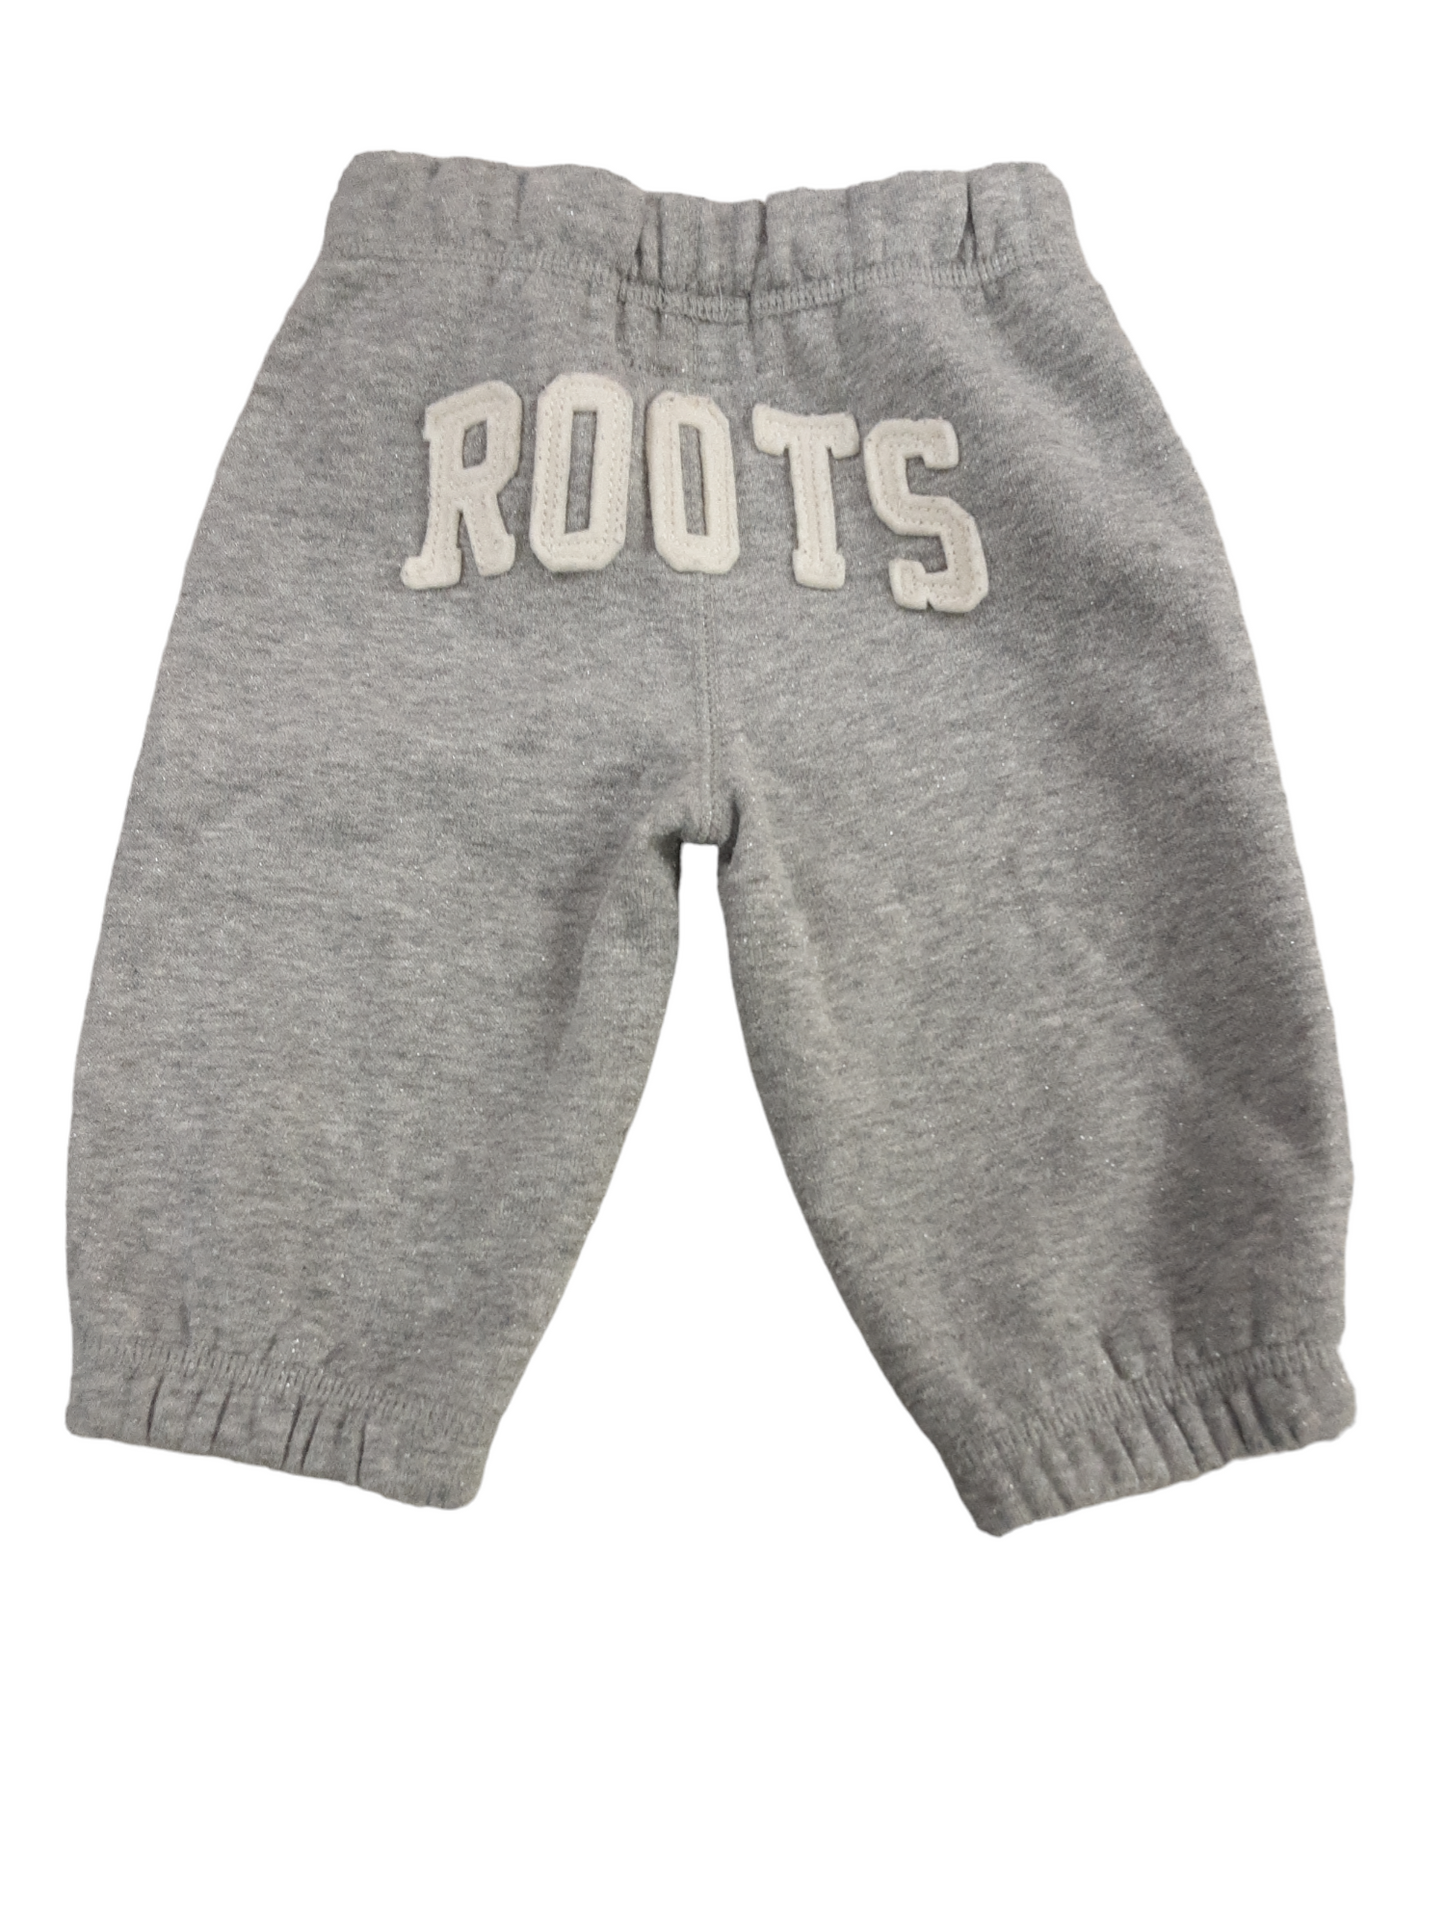 Gray  with sparkles Roots joggers size 3-6months